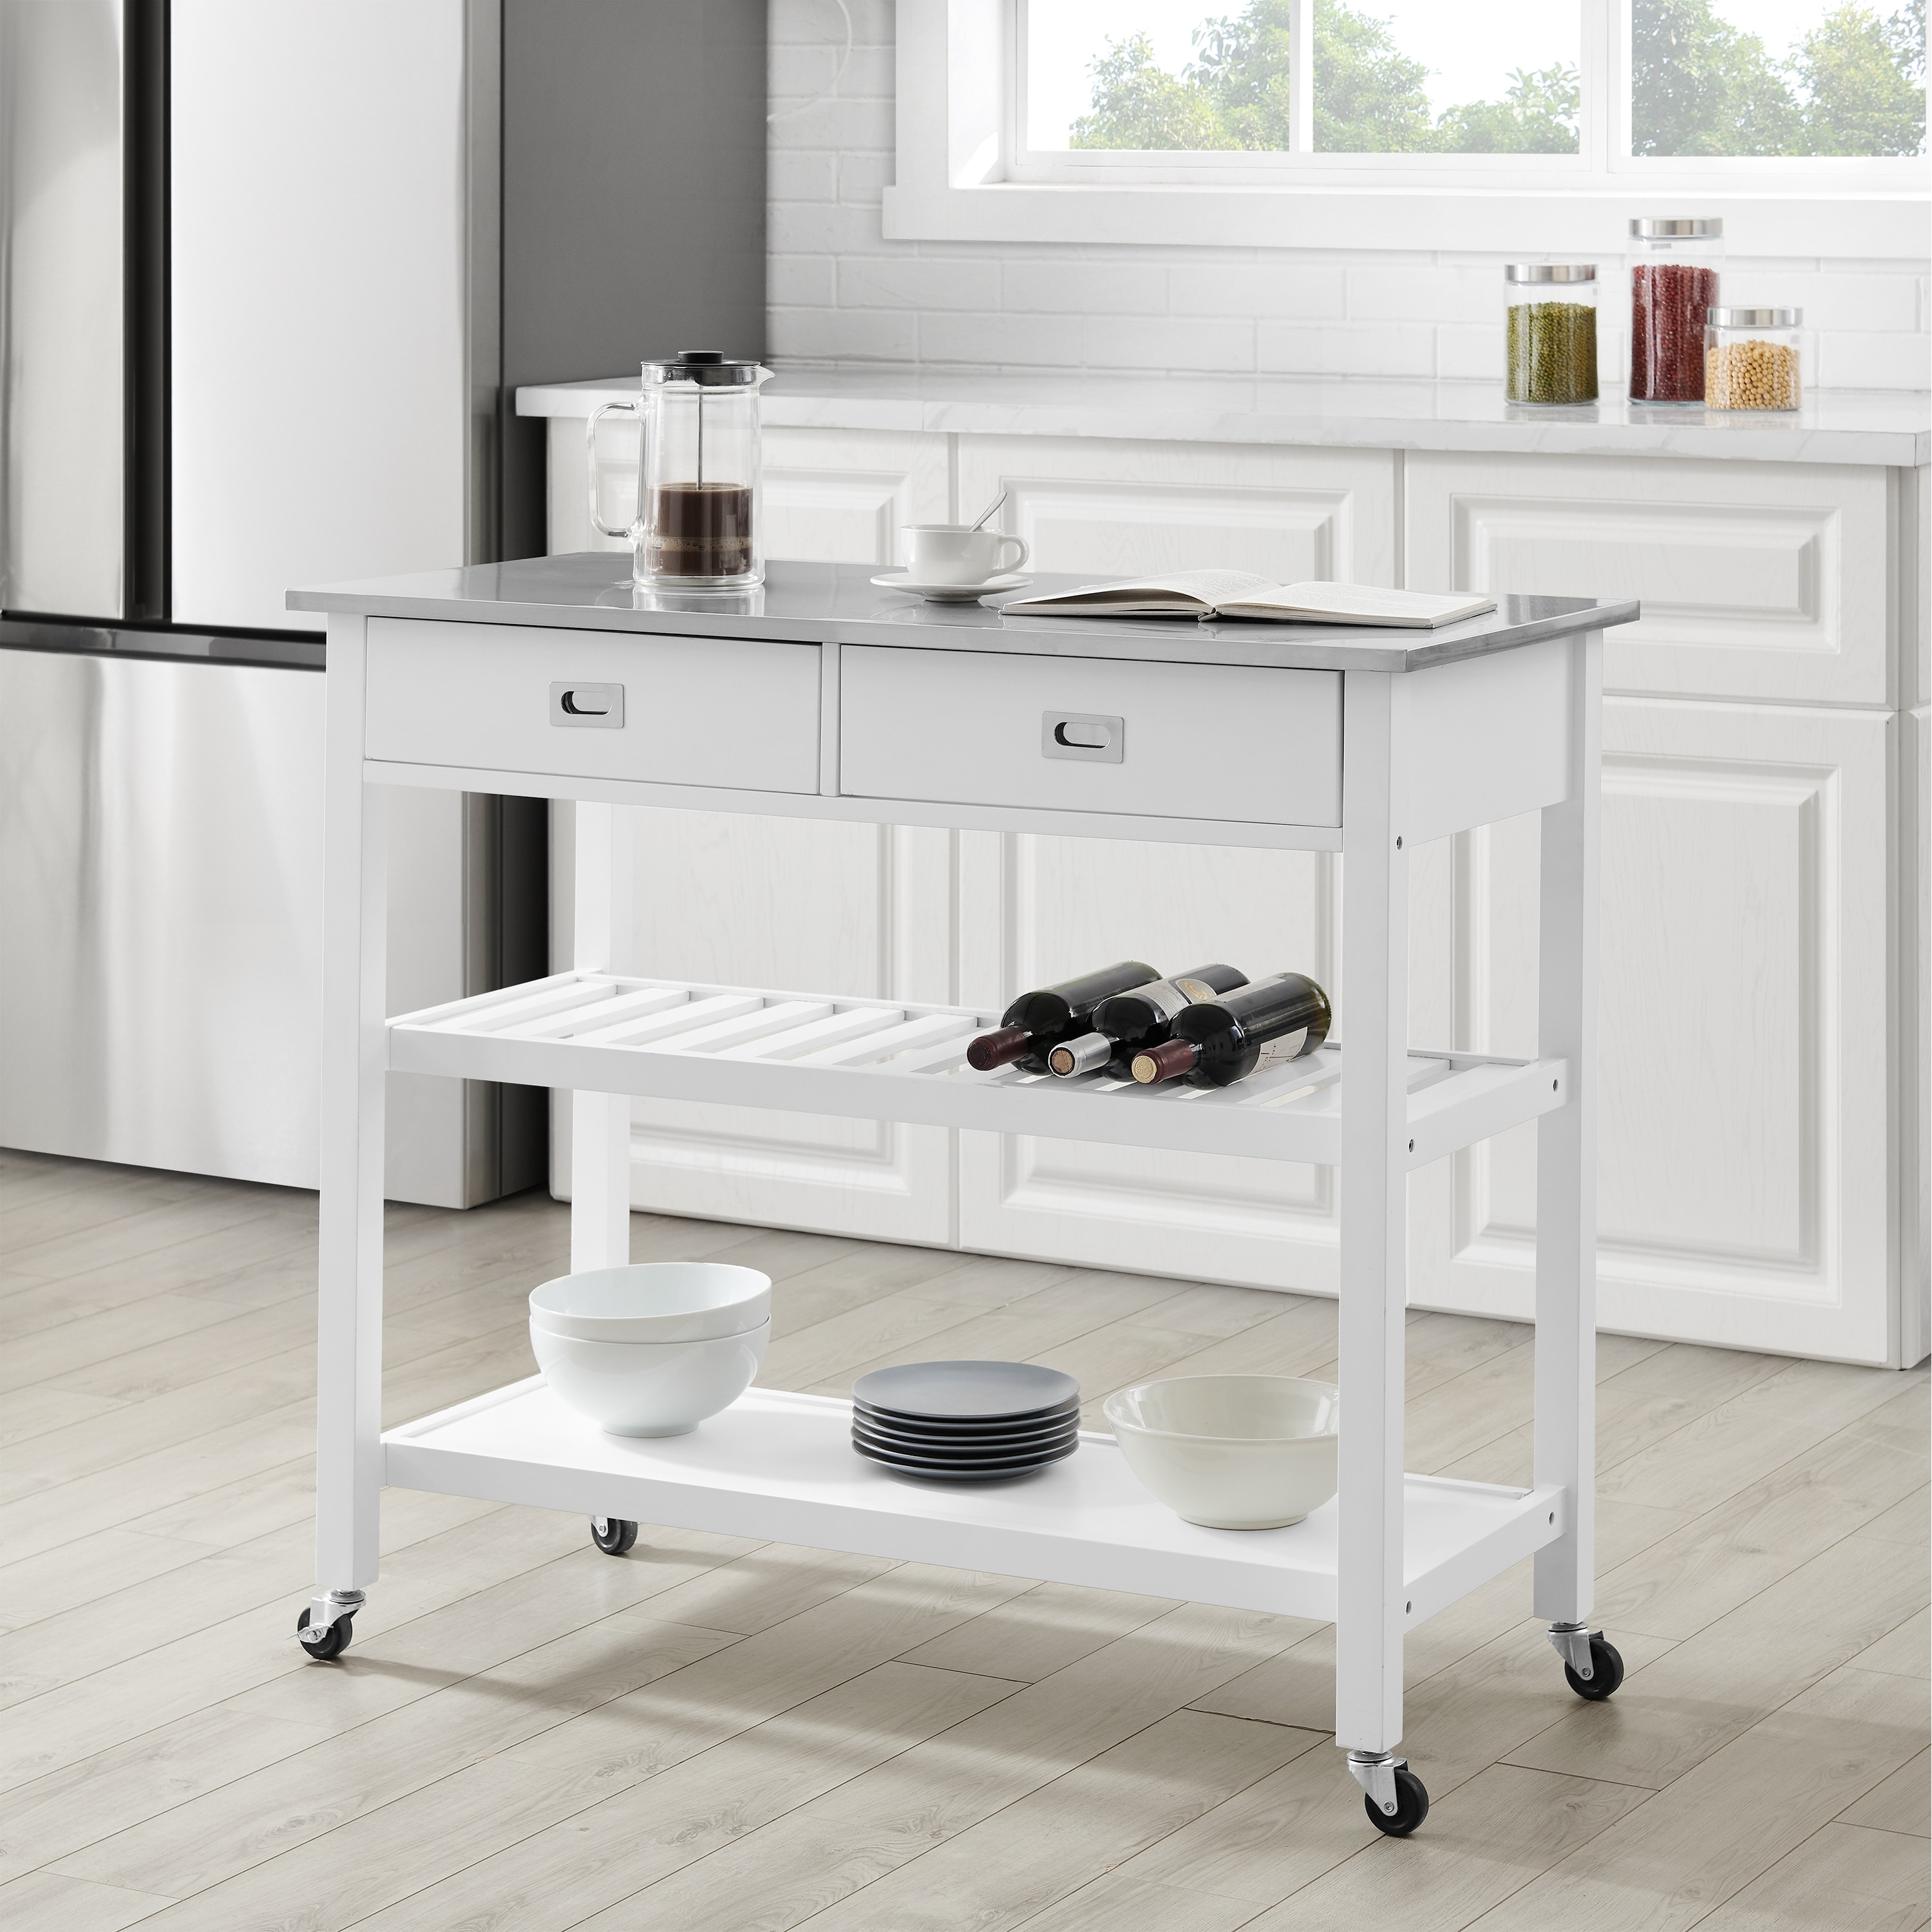 Shop Black Friday Deals On Chloe Stainless Steel Top Kitchen Island Cart 37h X 42w X 20d Overstock 31104175